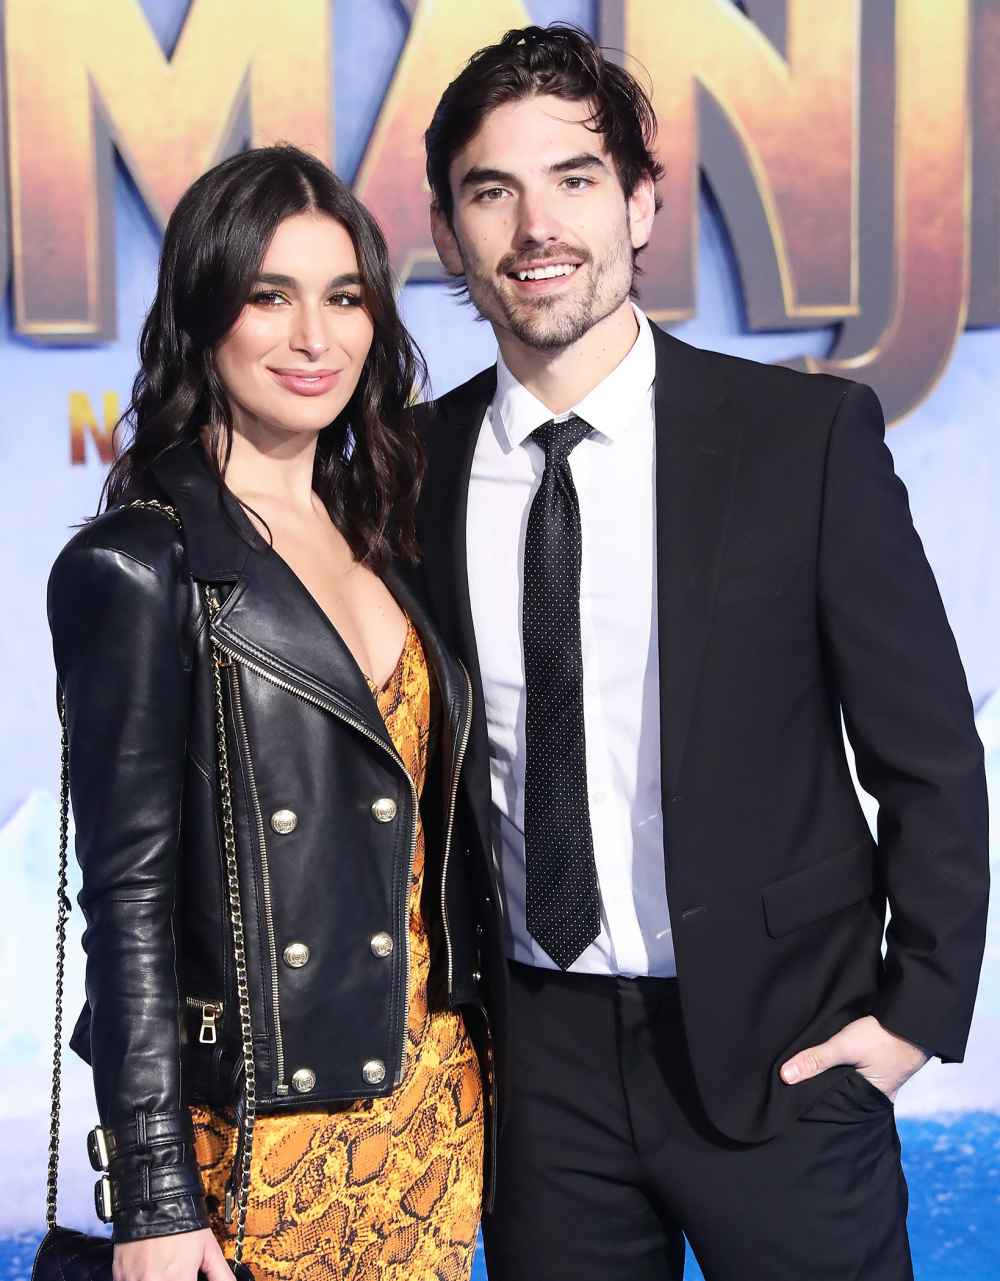 Ashley Iaconetti and Jared Haibon Are Hoping to Conceive 1st Child ‘Soon'